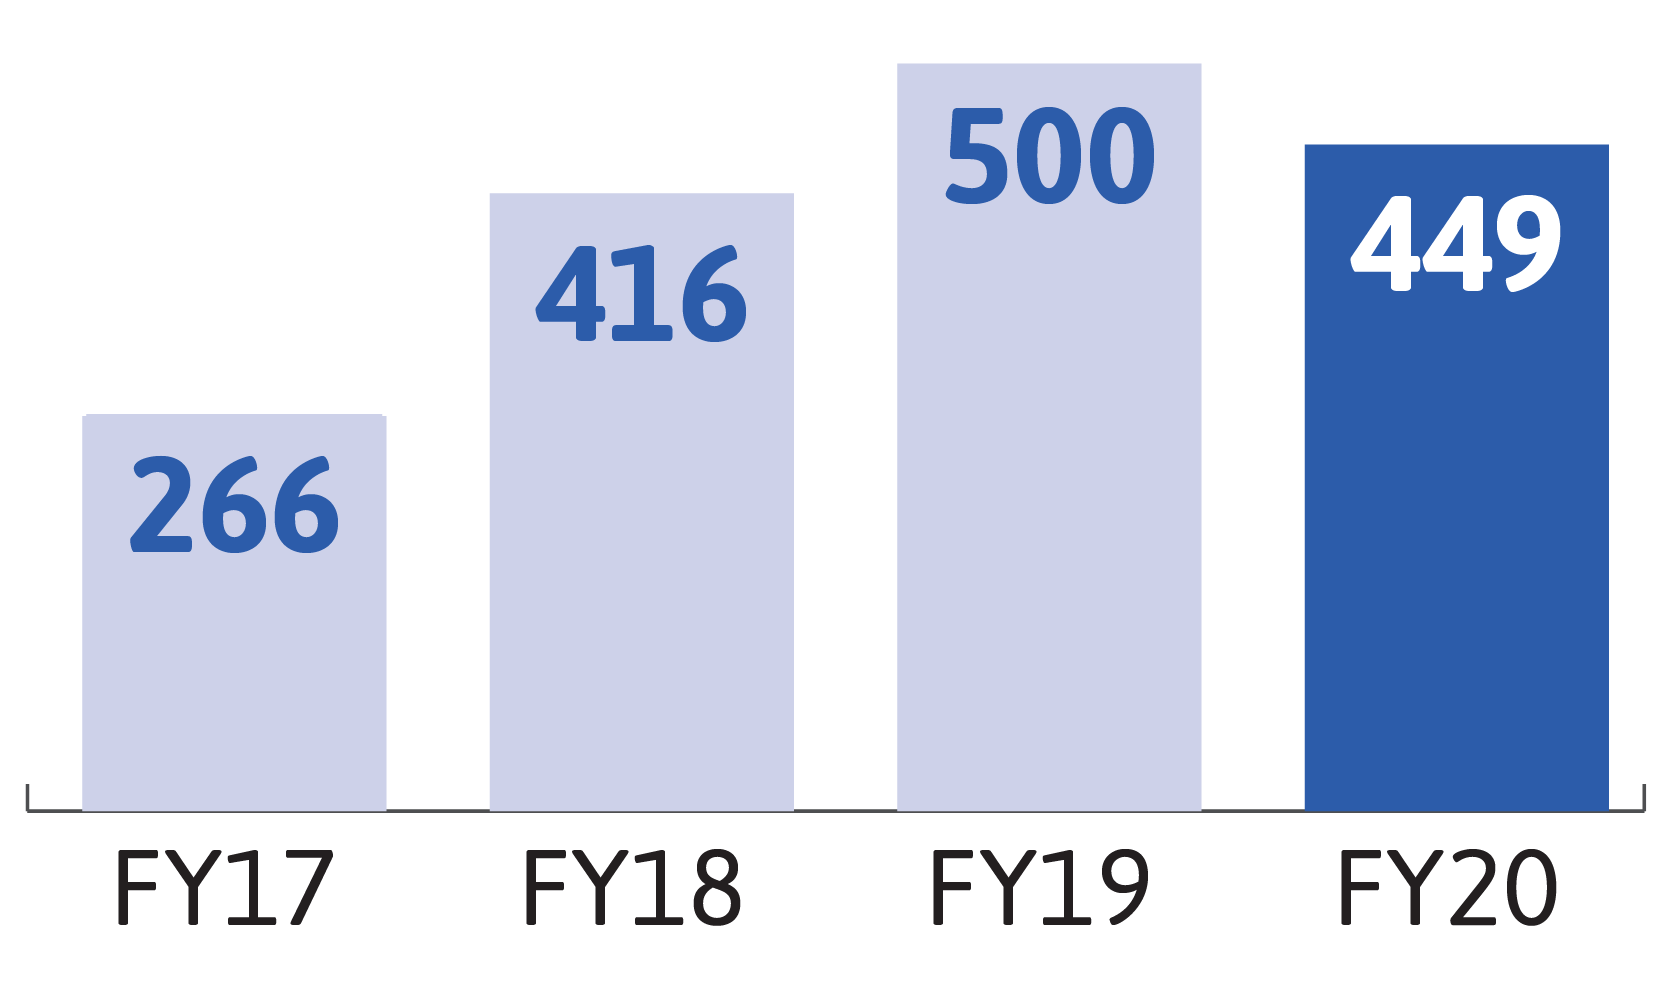 A bar chart showing the number of disclosures received by the Title IX Office and Title IX Resource Coordinators from FY17-FY20.